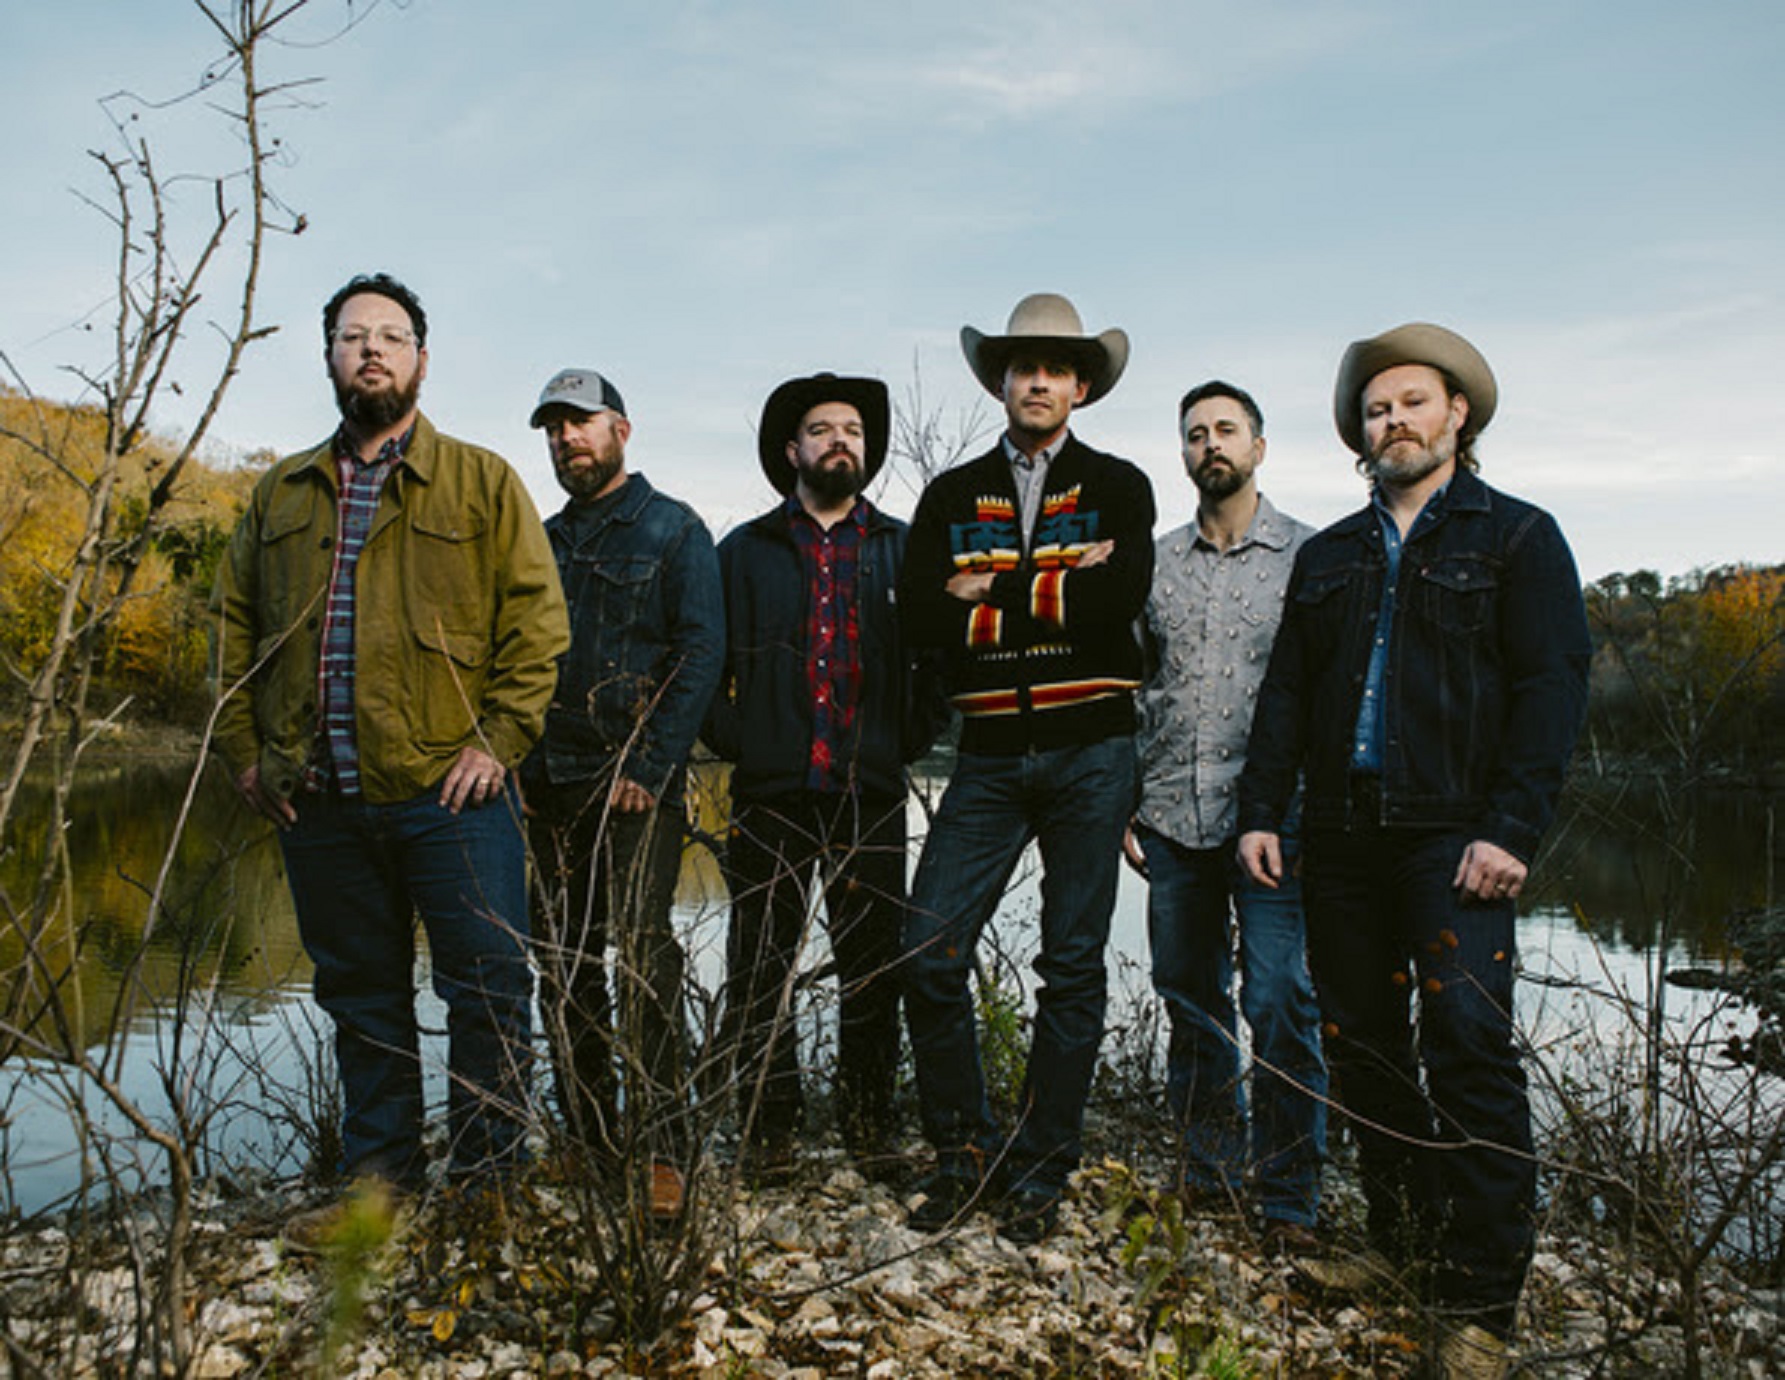 Turnpike Troubadours return with highly anticipated new album "A Cat in the Rain" on August 25, first single "Mean Old Sun" debuts today